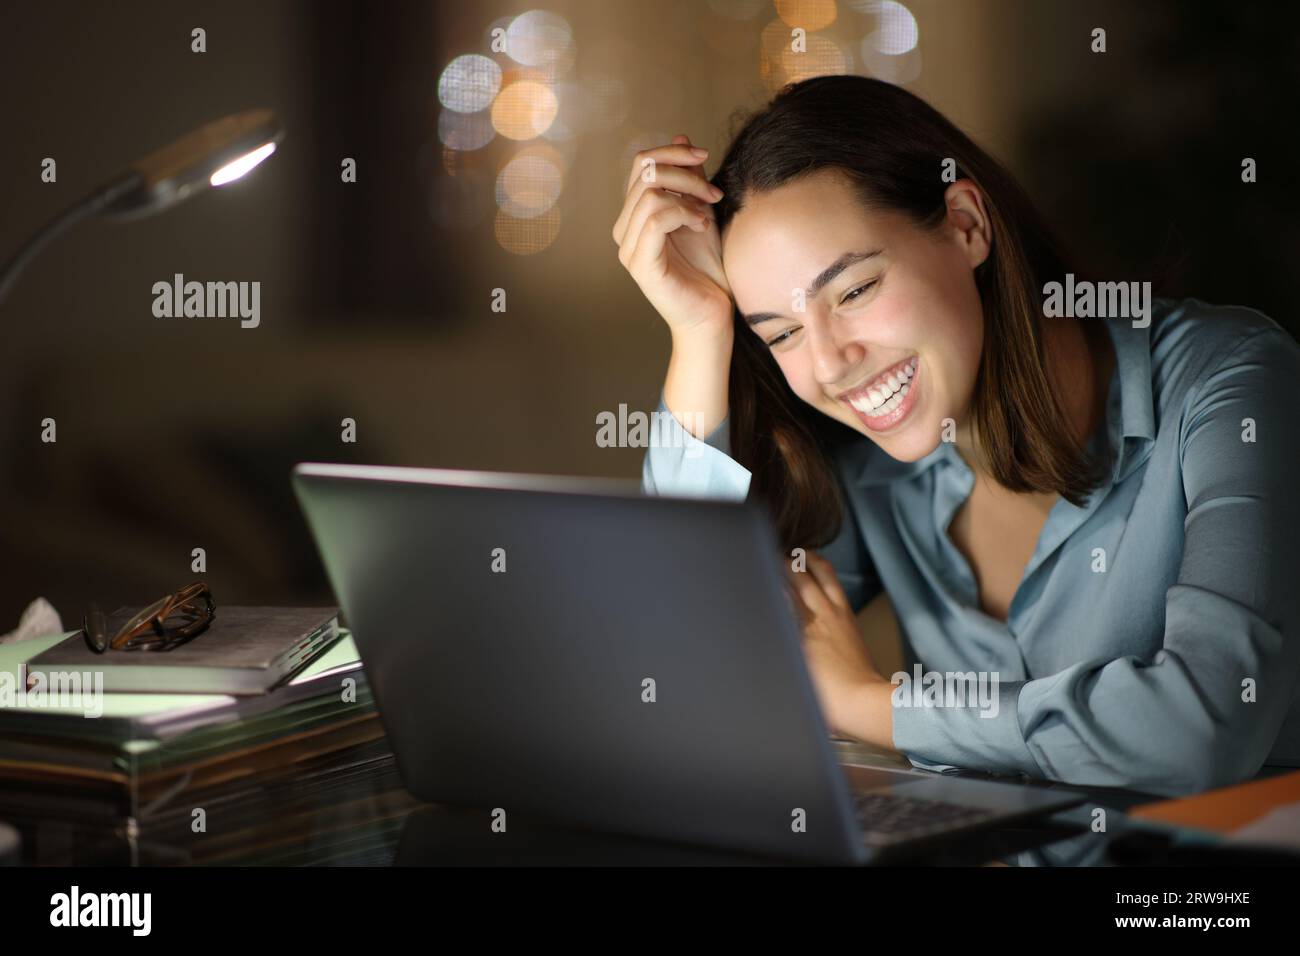 Happy busineswoman laughing in the night using laptop at home Stock Photo